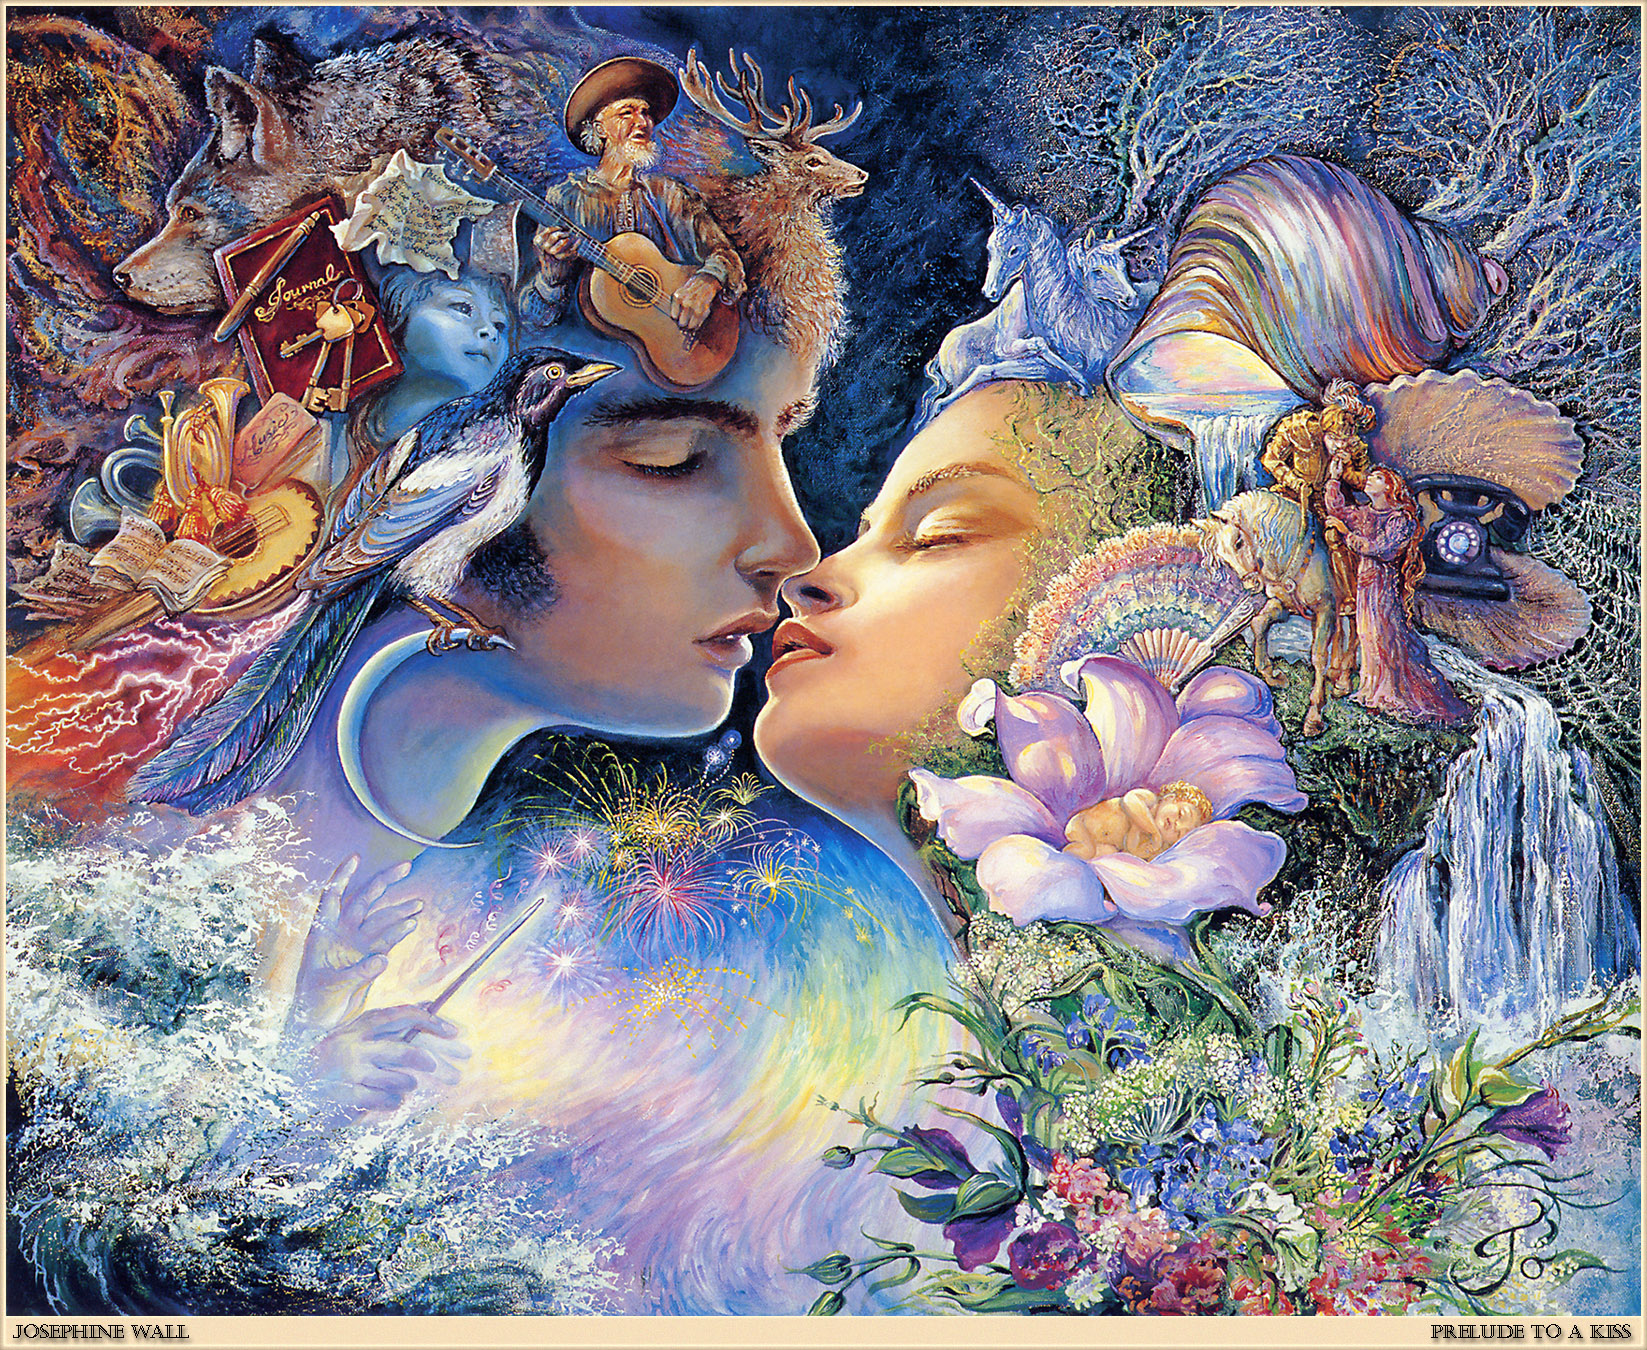 Loves First Kiss by Josephine Wall